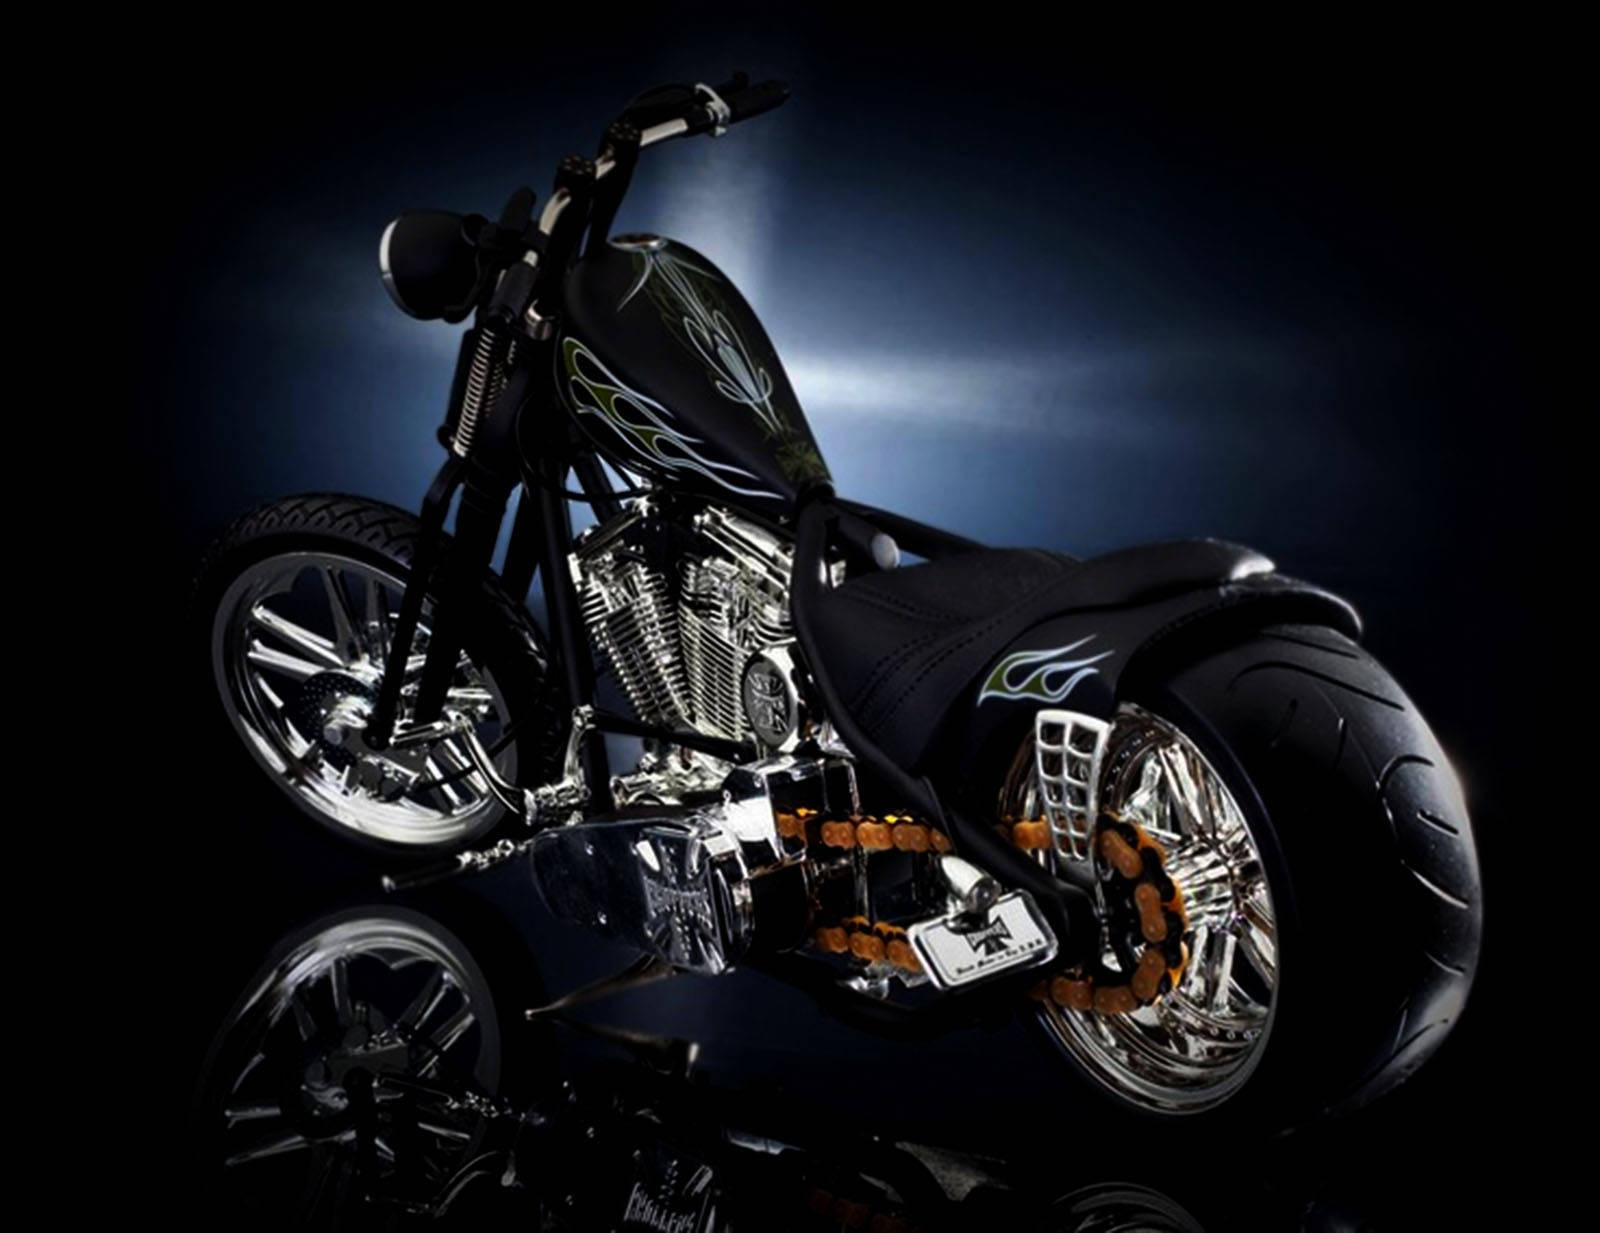 A Black Motorcycle With Chrome Wheels And A Chrome Frame Wallpaper